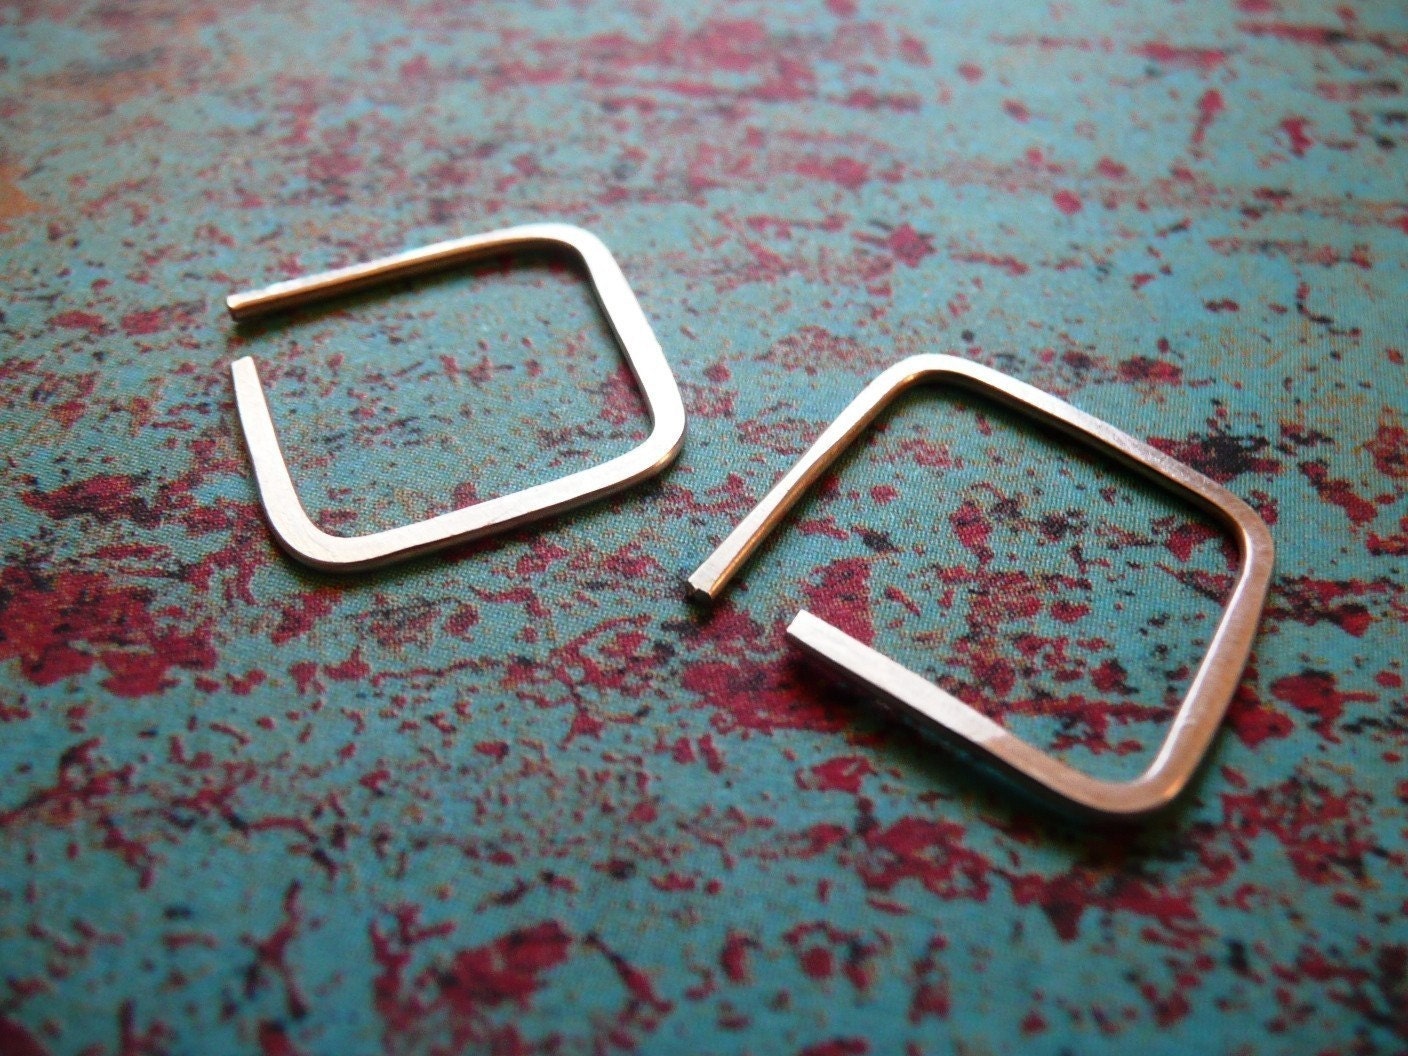 Steph Chows – Giving away 2 pairs of my little square hoop earrings…